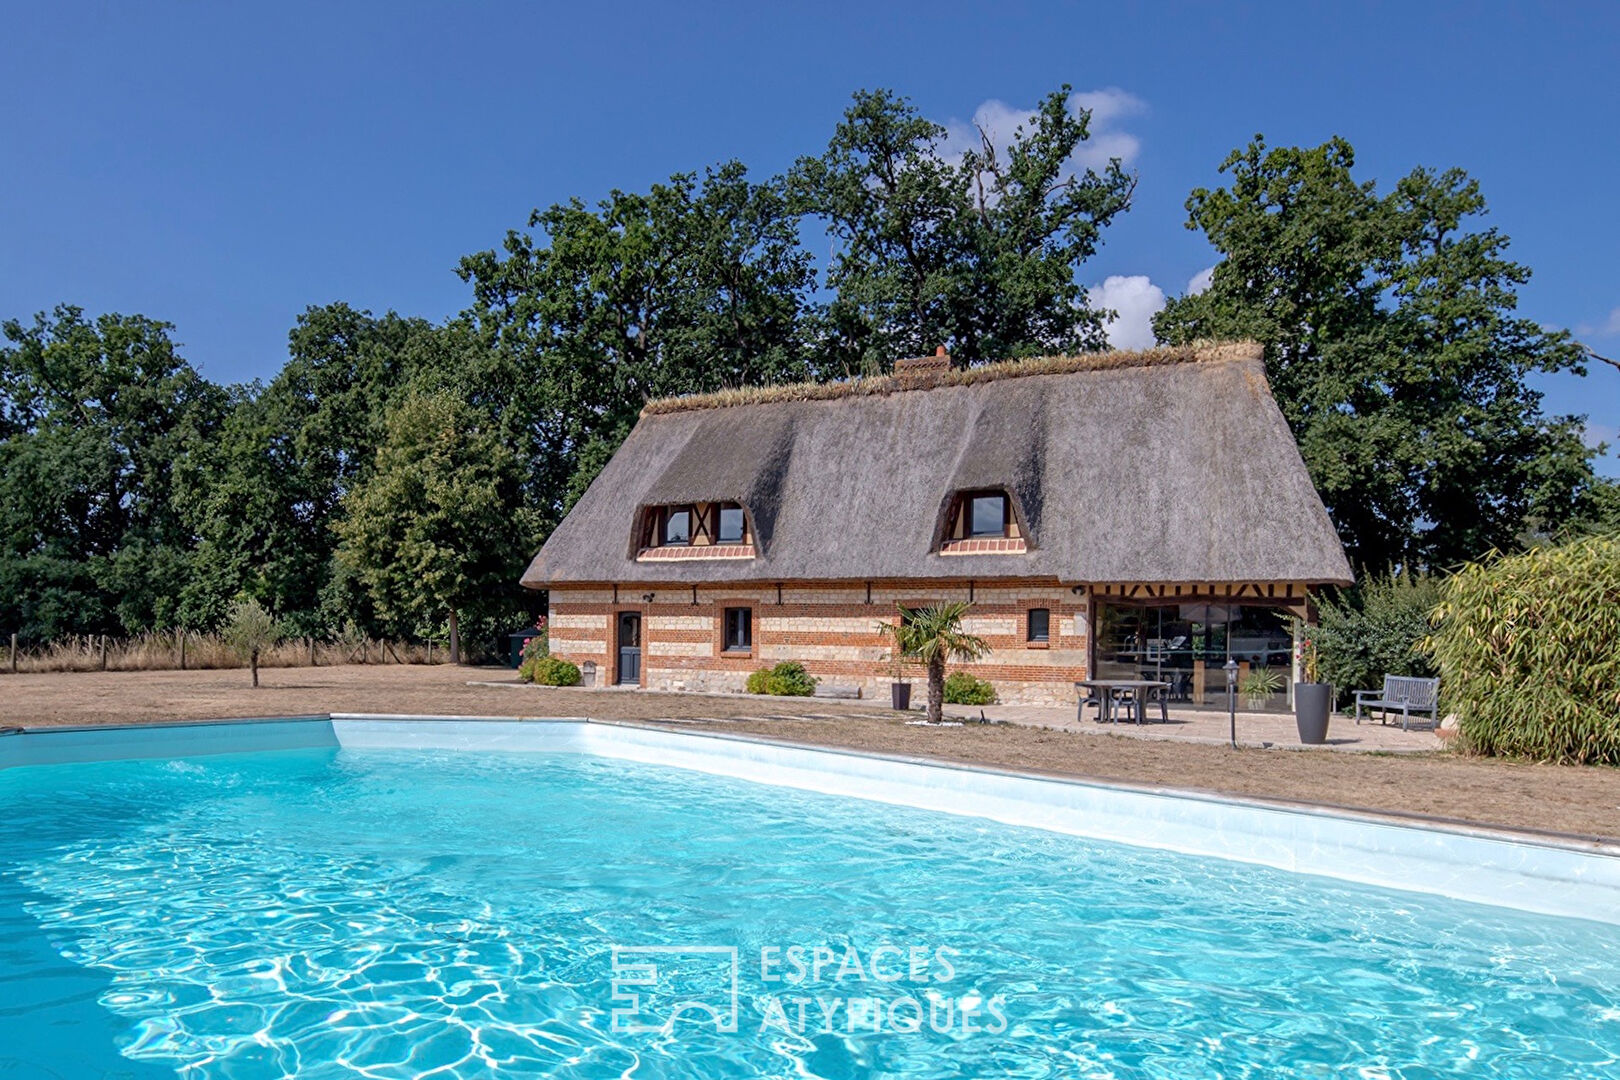 Thatched cottage from an old barn with swimming pool and outbuilding